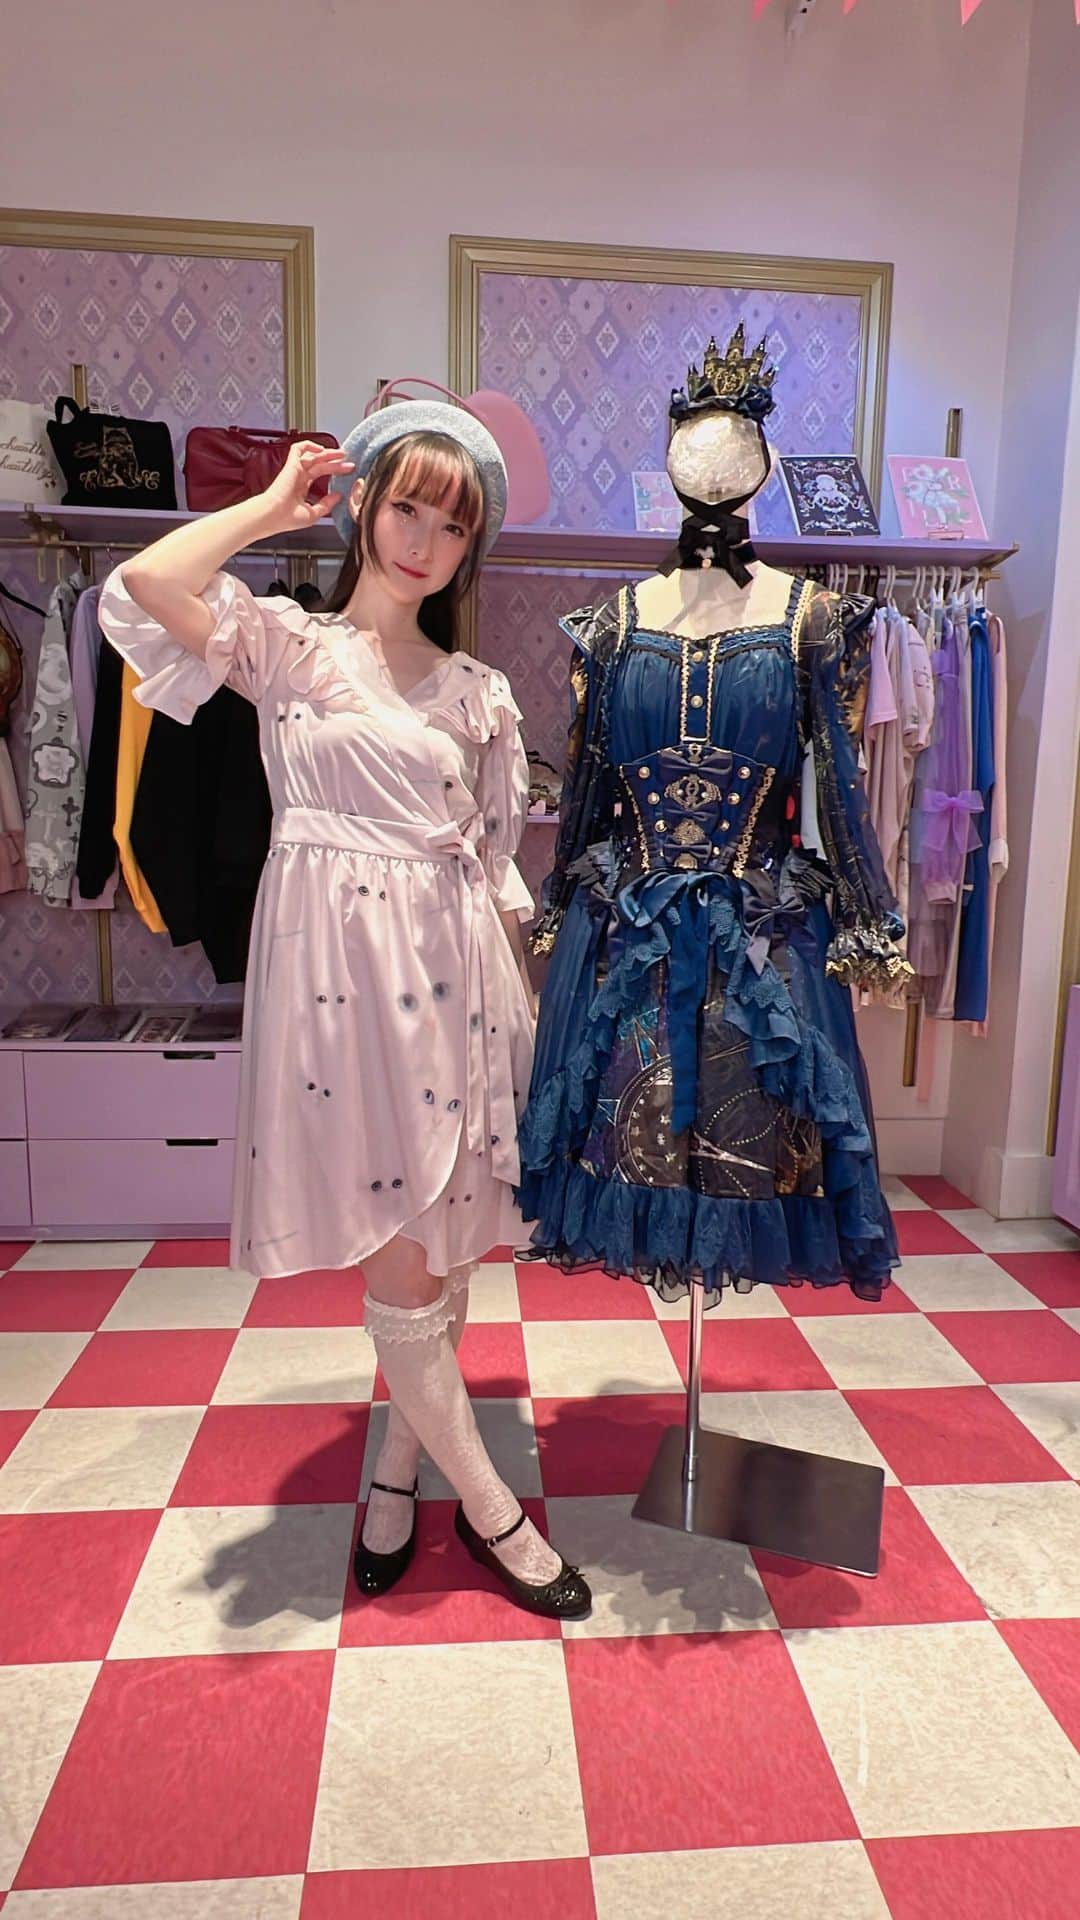 RinRinのインスタグラム：「Sharing some looks from RinRin Boutique now available online and in-store at @harajukuhearts in San Francisco! 🎀 RinRin Boutique features RinRin’s select brands from Harajuku, Japan bringing the latest in-season styles directly to you💜 currently we have @milk__official_ @milkboy_official @axes_femme_kawaii_official @hoshibakoworks   Thank you for watching!😘 FREE SHIPPING COUPON CODE: 🎀RinRinBoutique22🎀 *within the US Please put the code in at checkout!  #rinrindoll #japan #tokyo #harajuku #japanesefashion #tokyofashion #harajukufashion #東京 #コーデ #今日のコーデ #原宿 #ootd #lolitafashion #sanfrancisco #harajukuhearts #milkharajuku #milkboyharajuku #axesfemmekawaii #hoshibakoworks」